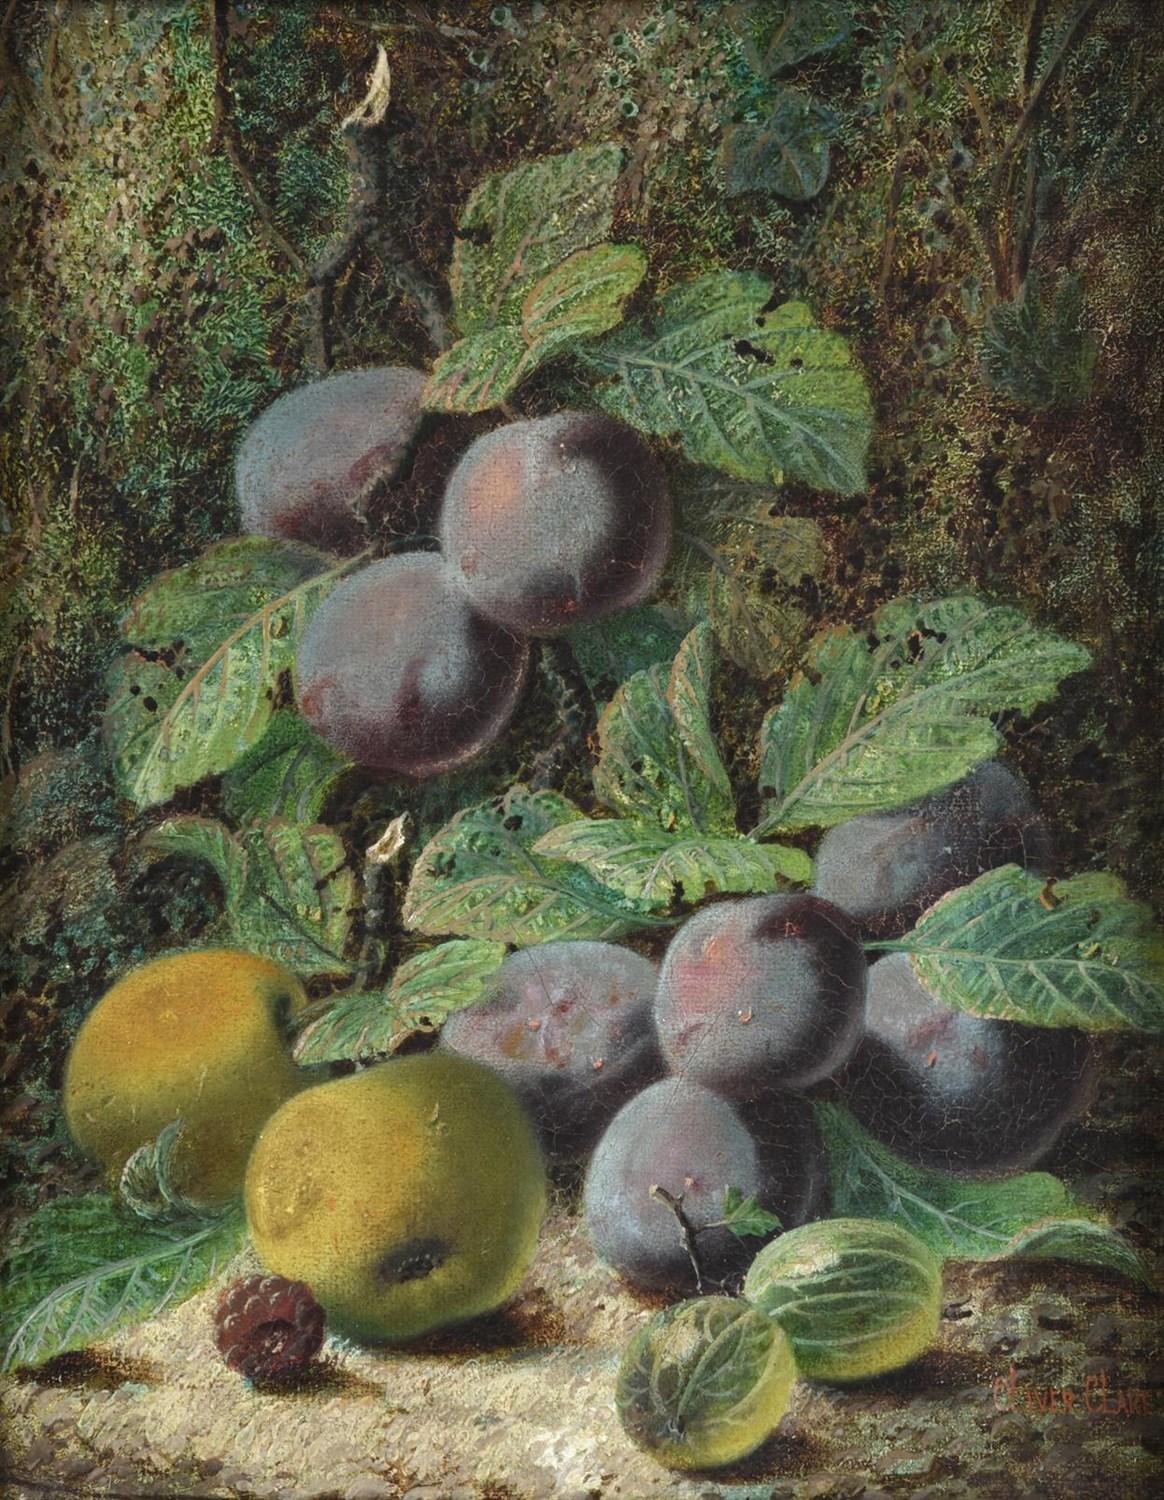 Lot 1119 - Oliver Clare (1853-1927) Still life of plums, apples and gooseberries on a mossy bank Signed,...